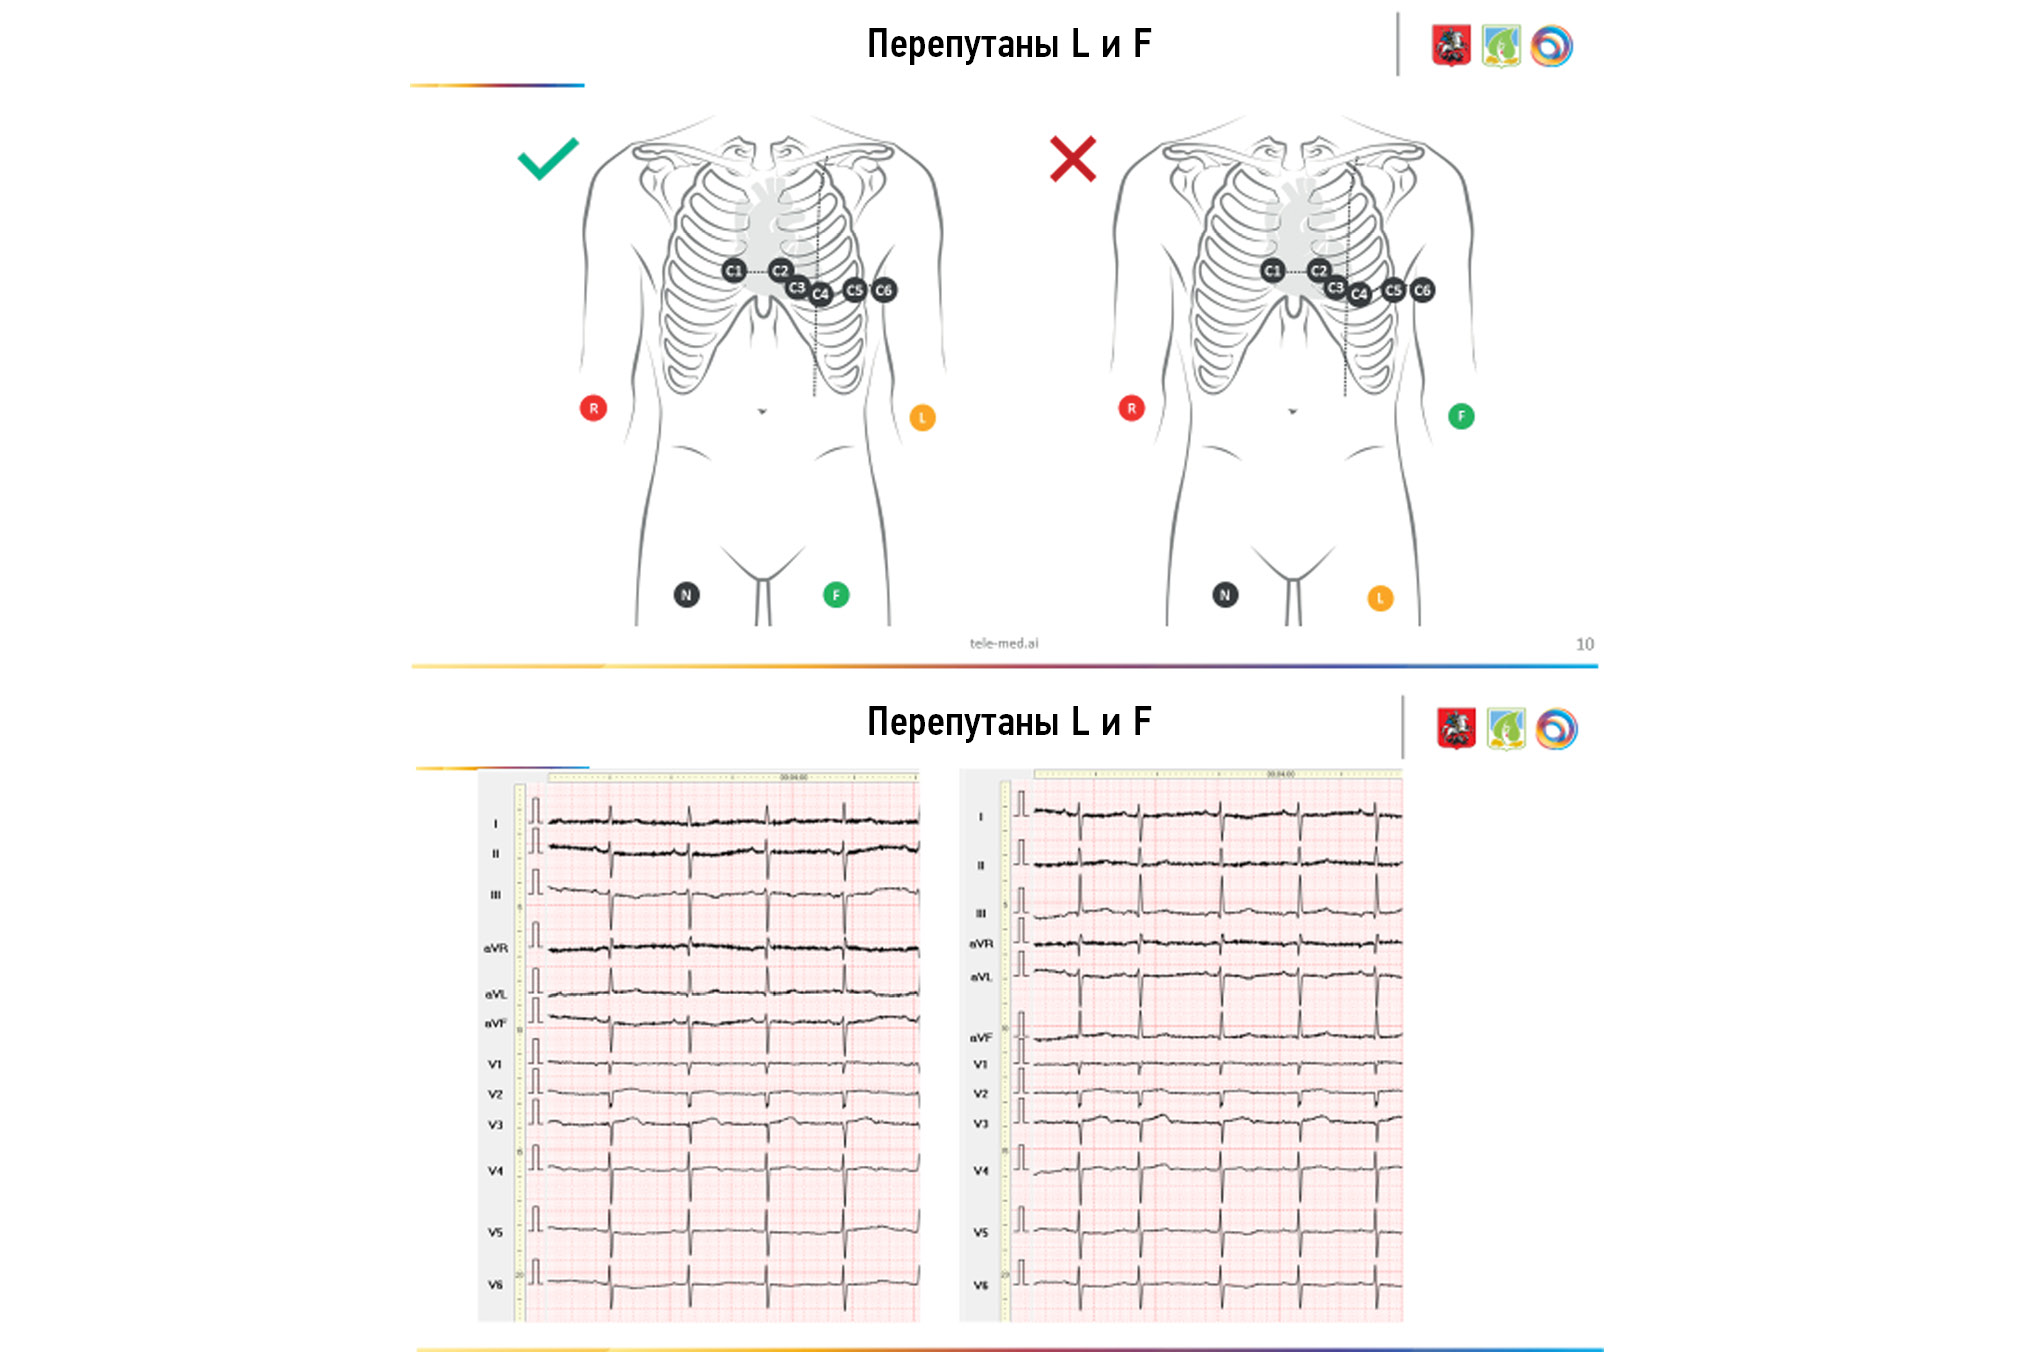 Creation of a training and test dataset with the disposition and transposition of overlaying electrocardiographic electrodes when recording electrocardiograms-12